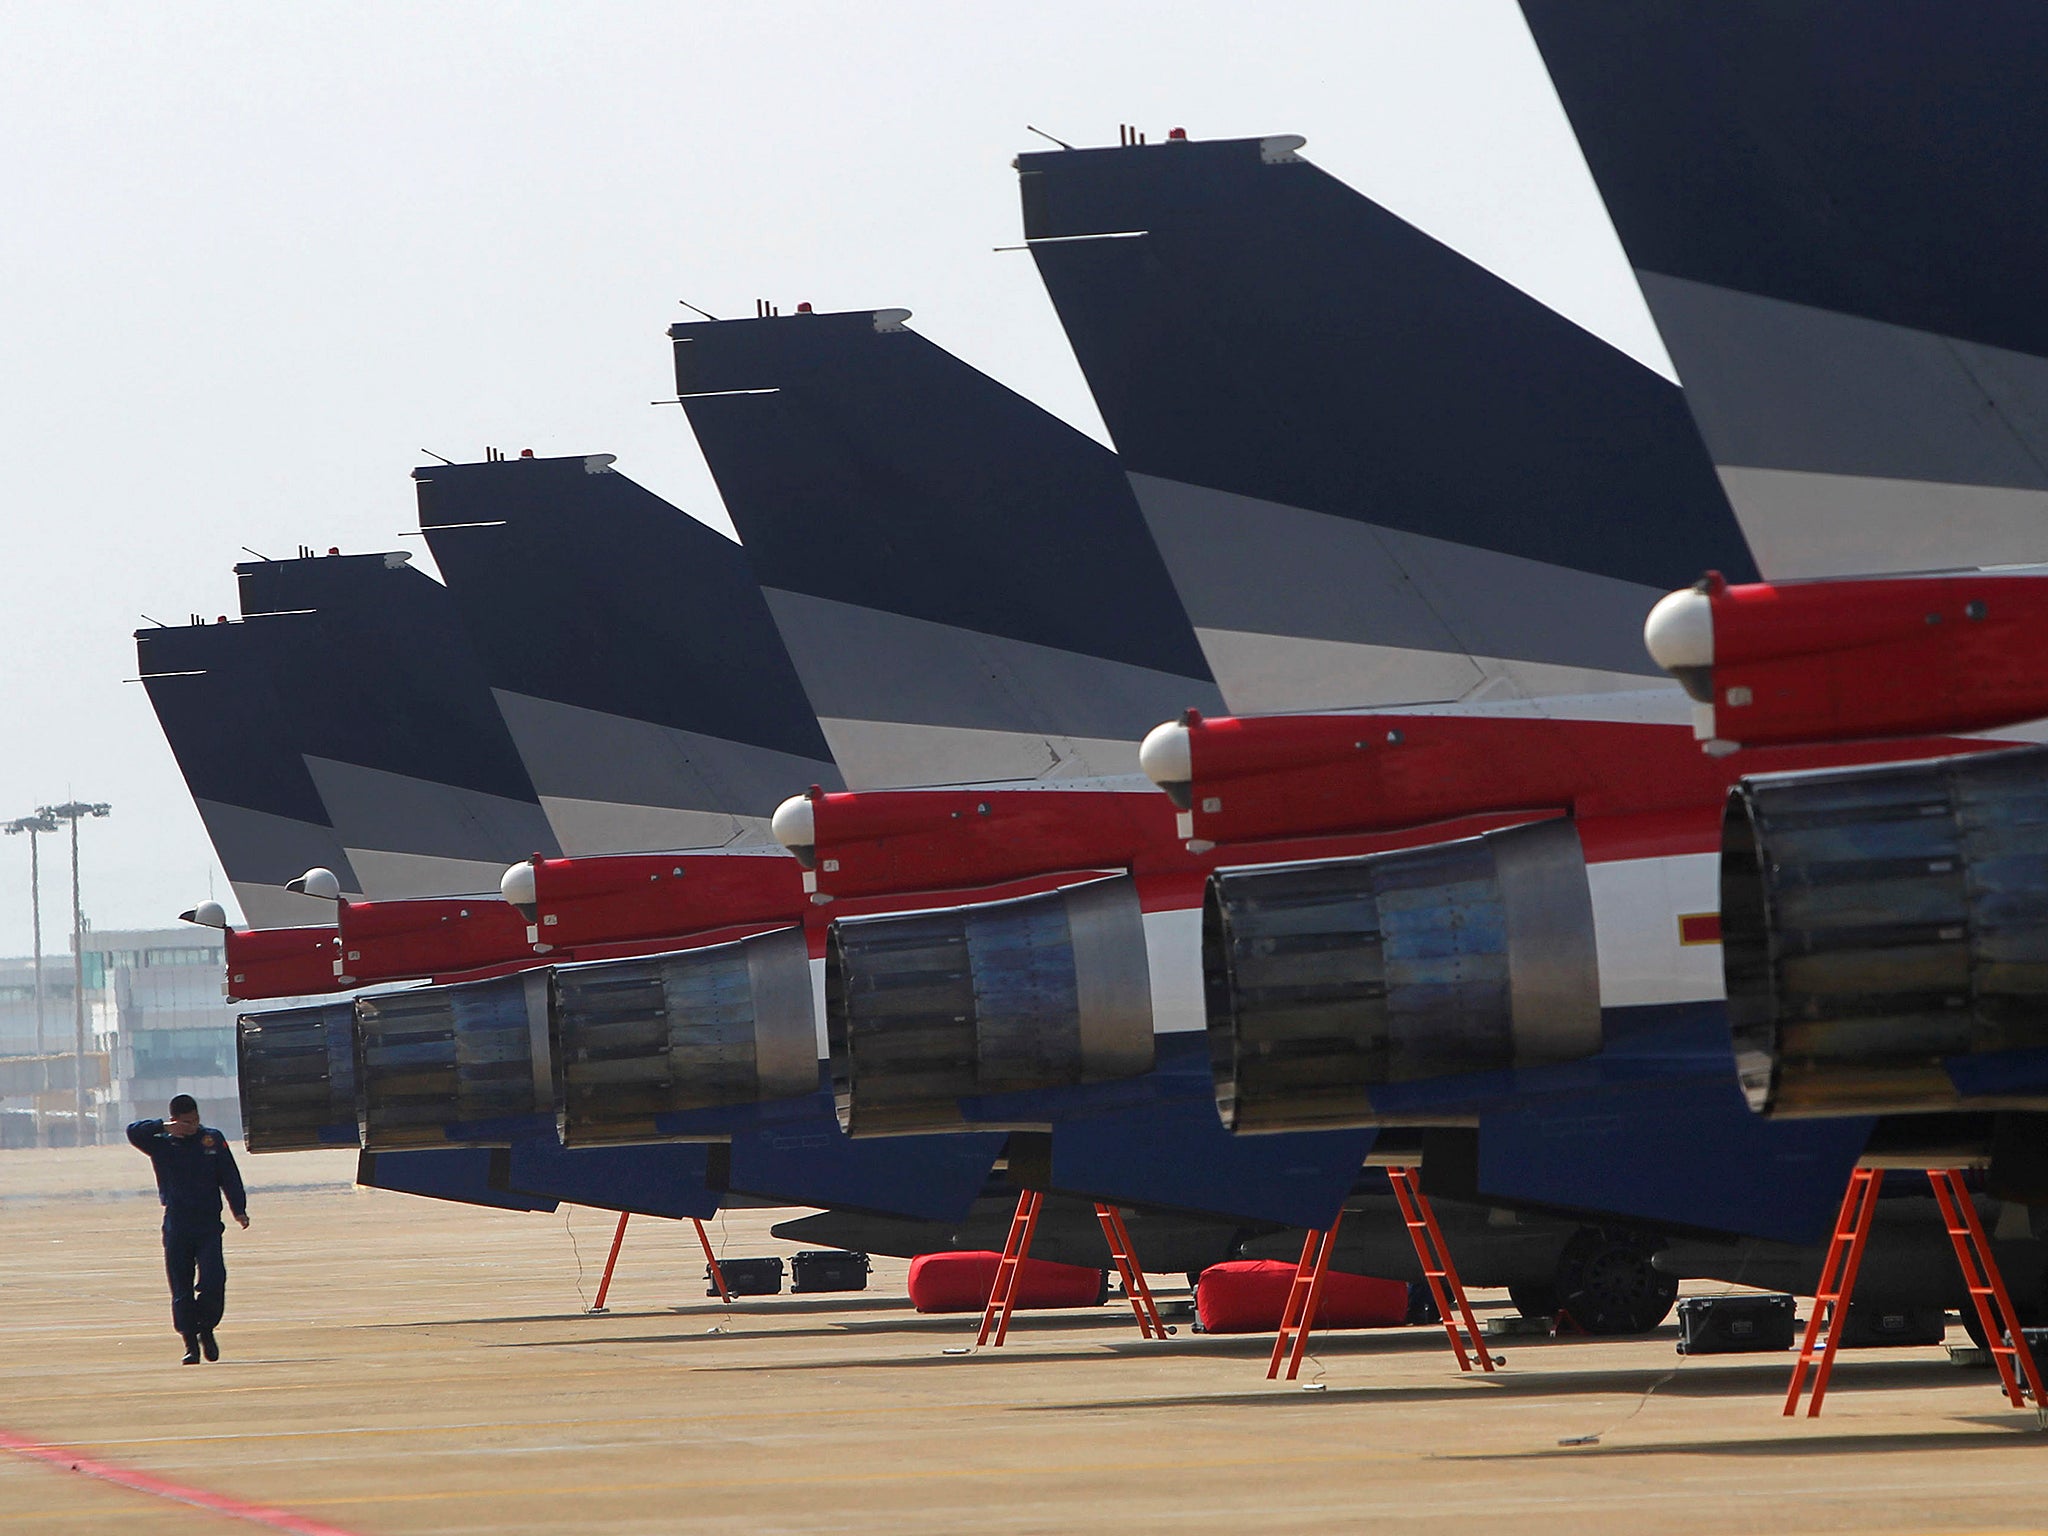 J-10 fighter jets from the 1 August aerobatics team of the People’s Liberation Army air force line up on the tarmac